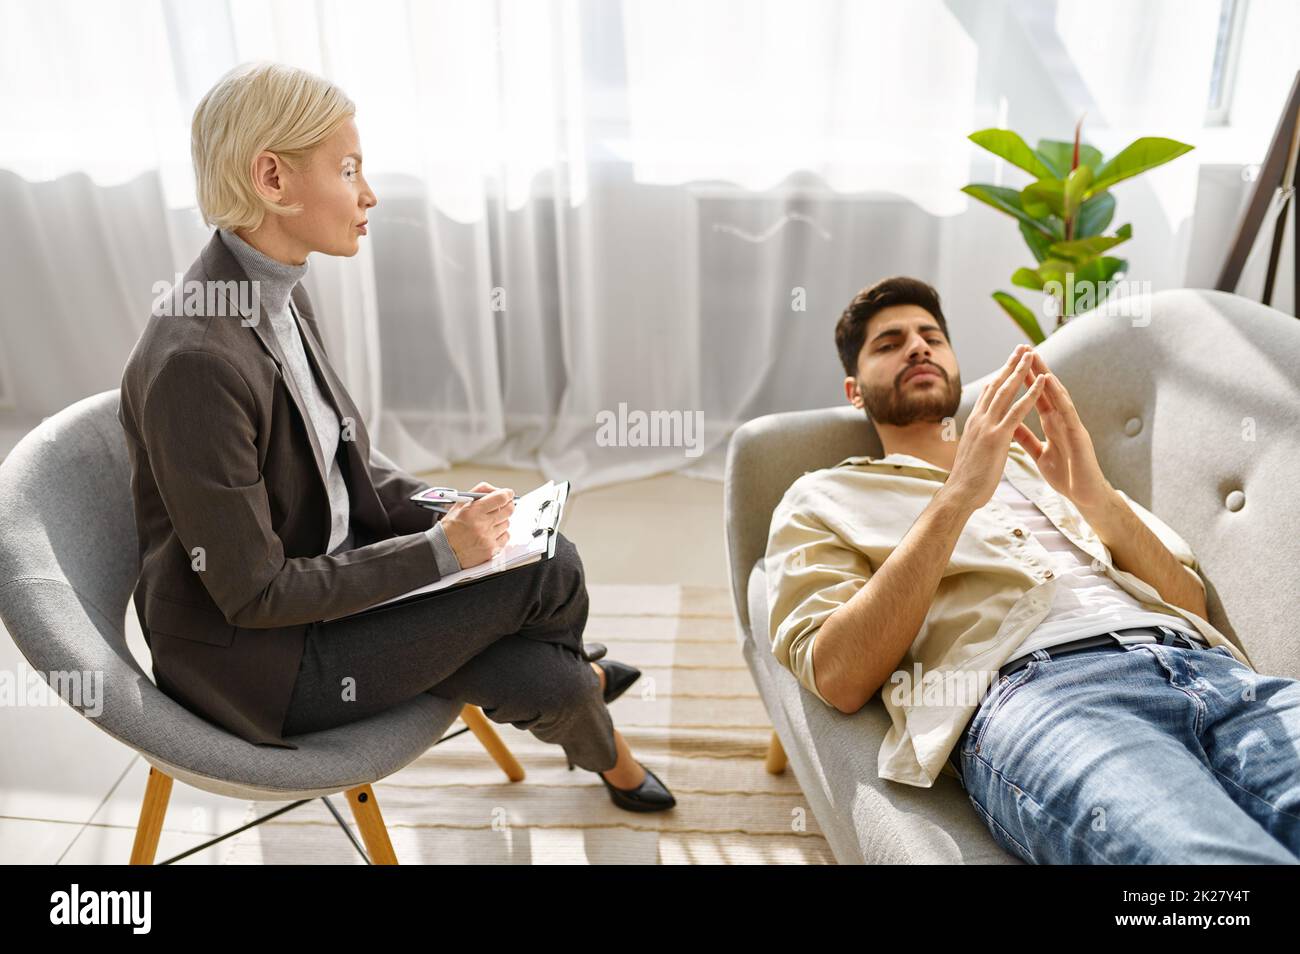 Female psychologist working with man on couch Stock Photo